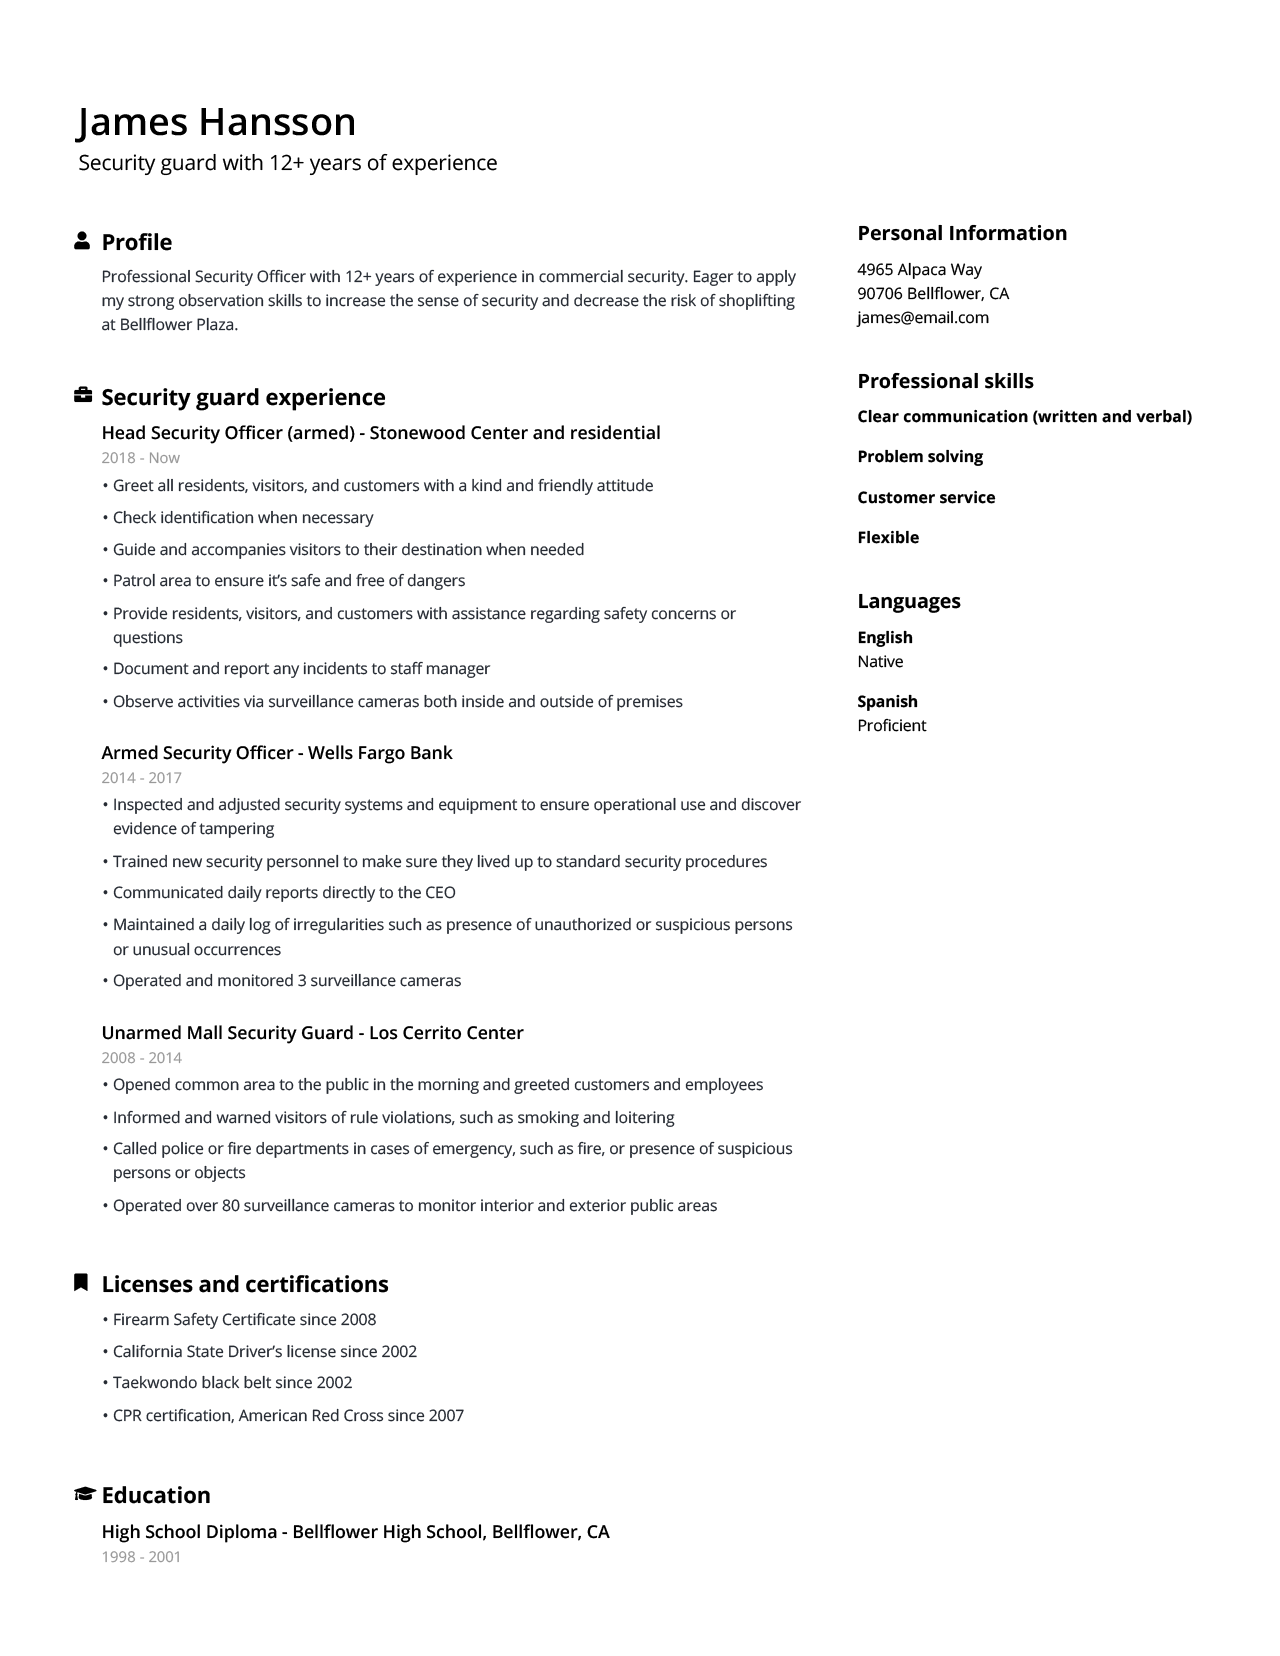 resume format for security guard job